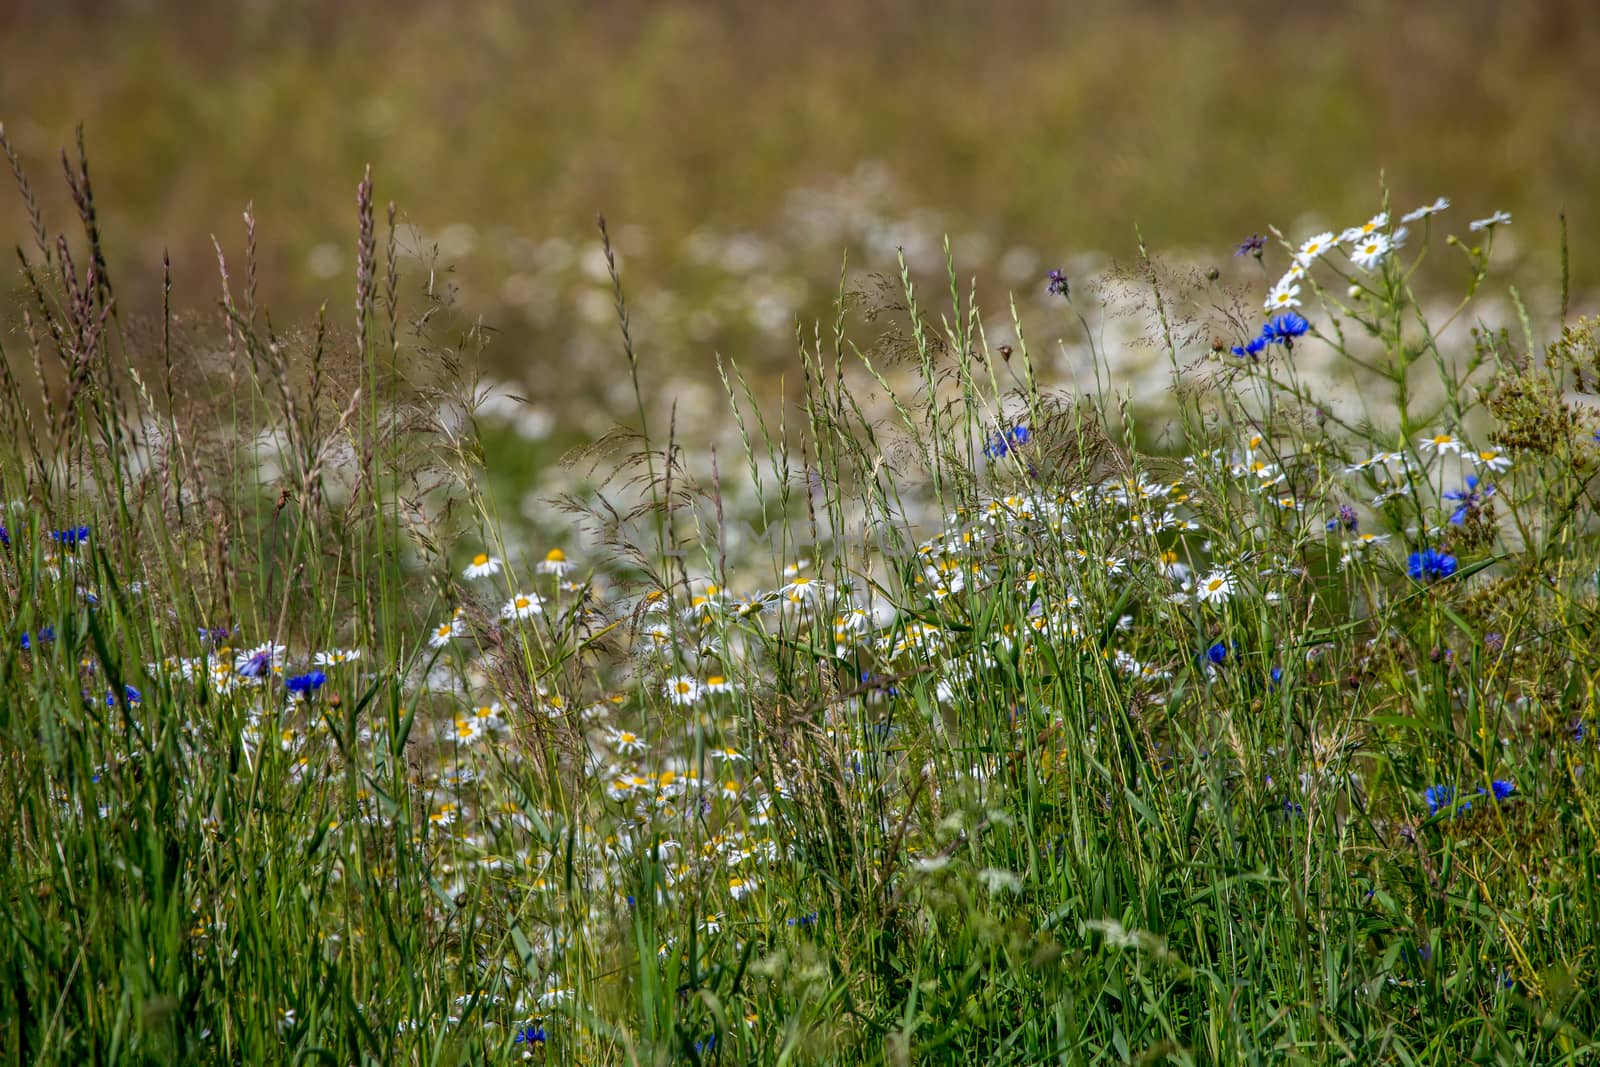 Daisy and cornflowers field. Beautiful blooming daisies and cornflowers in green grass. Meadow with daisies and cornflowers in Latvia. Nature flowers in spring and summer season in meadow. 